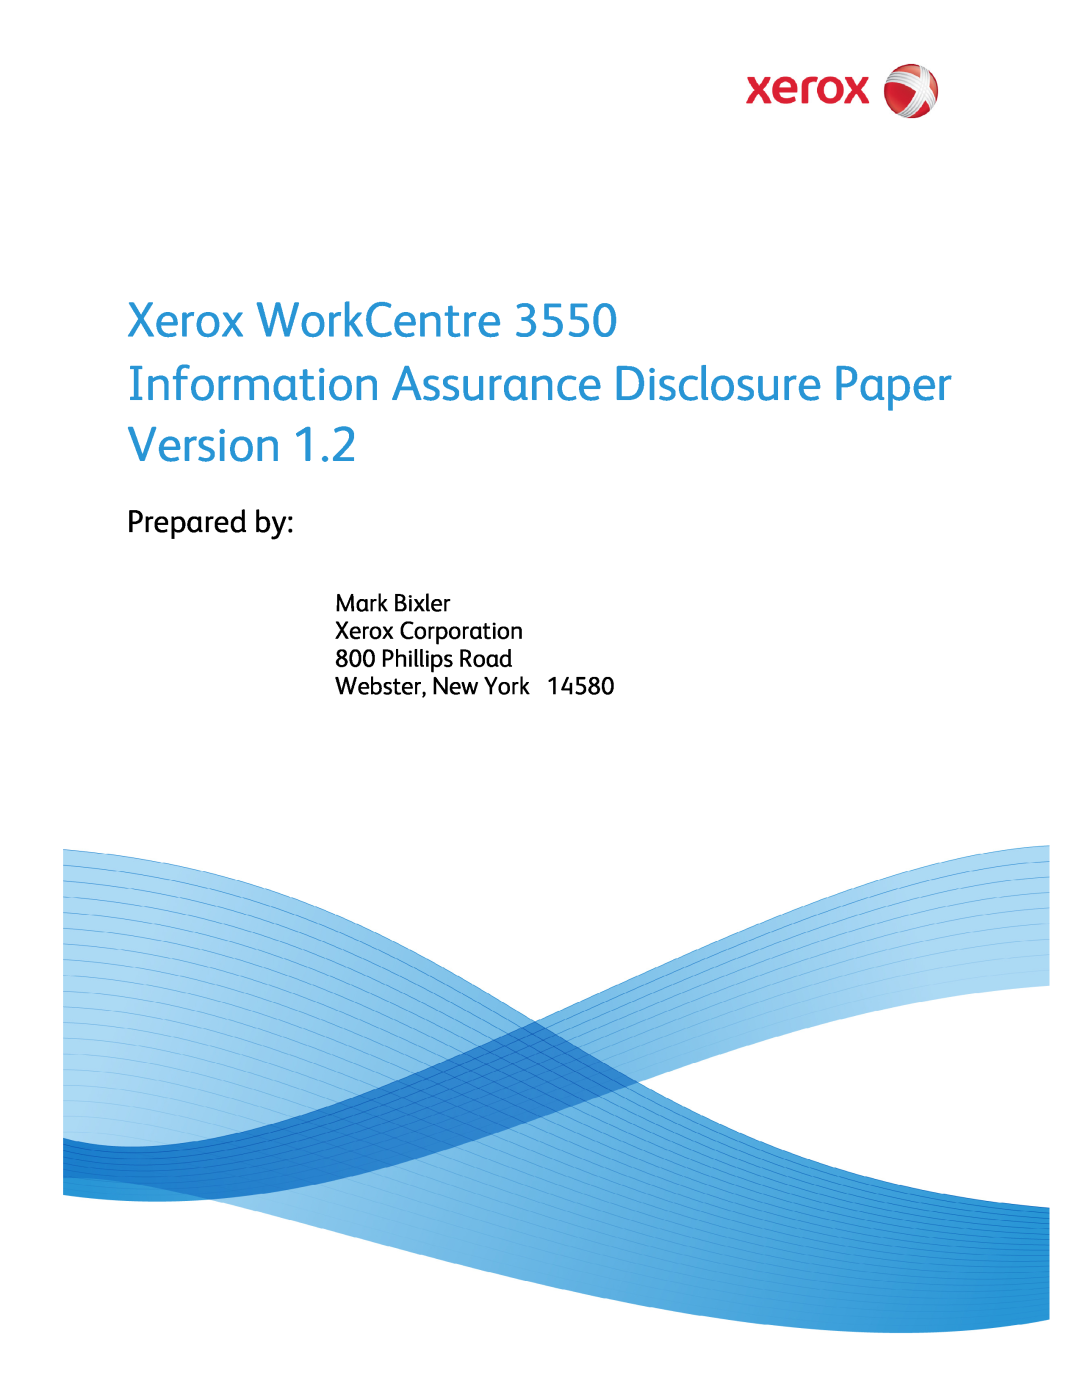 Xerox 3550 manual Xerox WorkCentre, Information Assurance Disclosure Paper Version, Prepared by, Webster, New York 